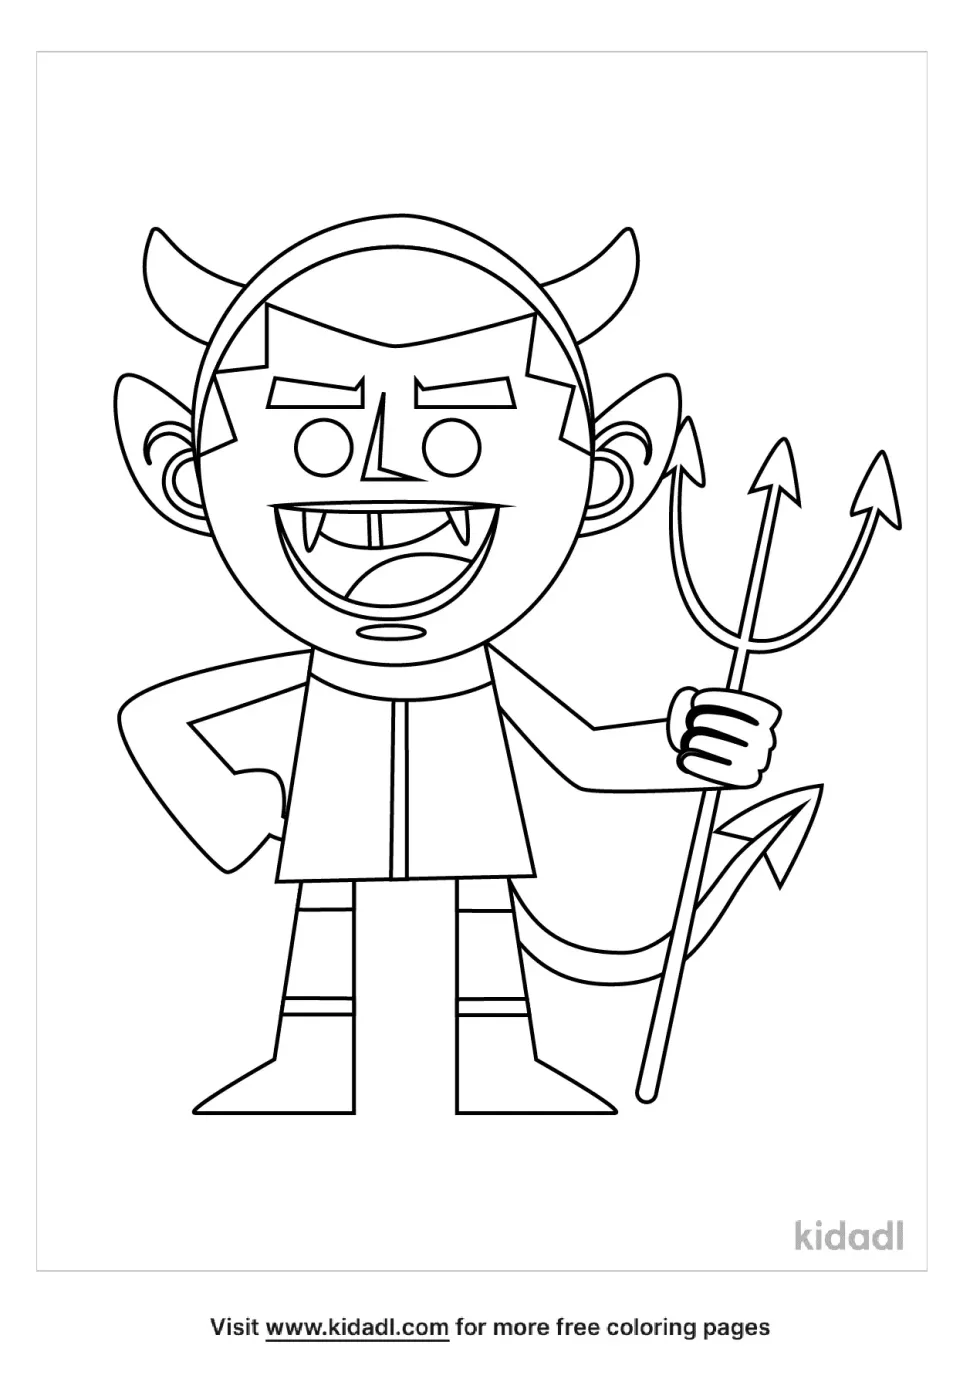 Little Halloween Devil Coloring Page